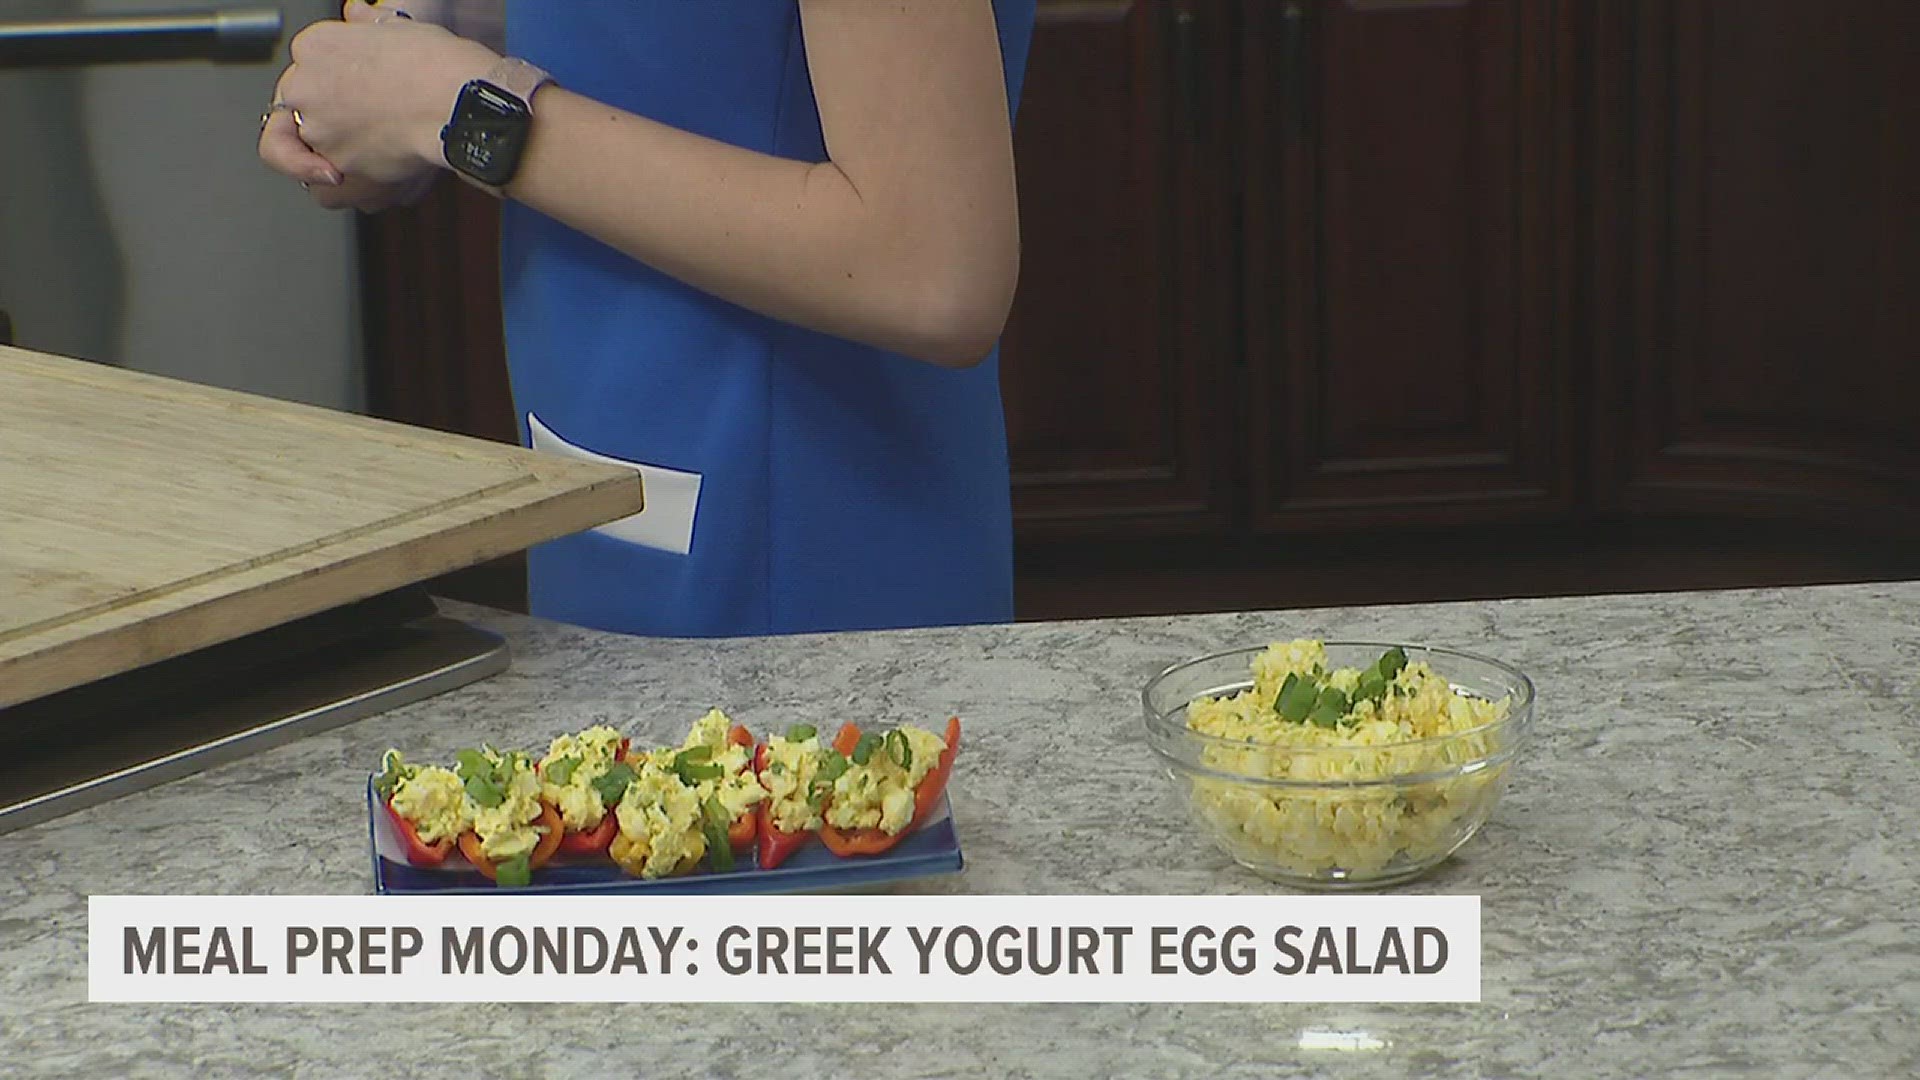 Low in calories but high in flavor: it's the delicious twist on the classic egg salad! This recipe swaps mayo out for Greek yogurt for an added health boost.